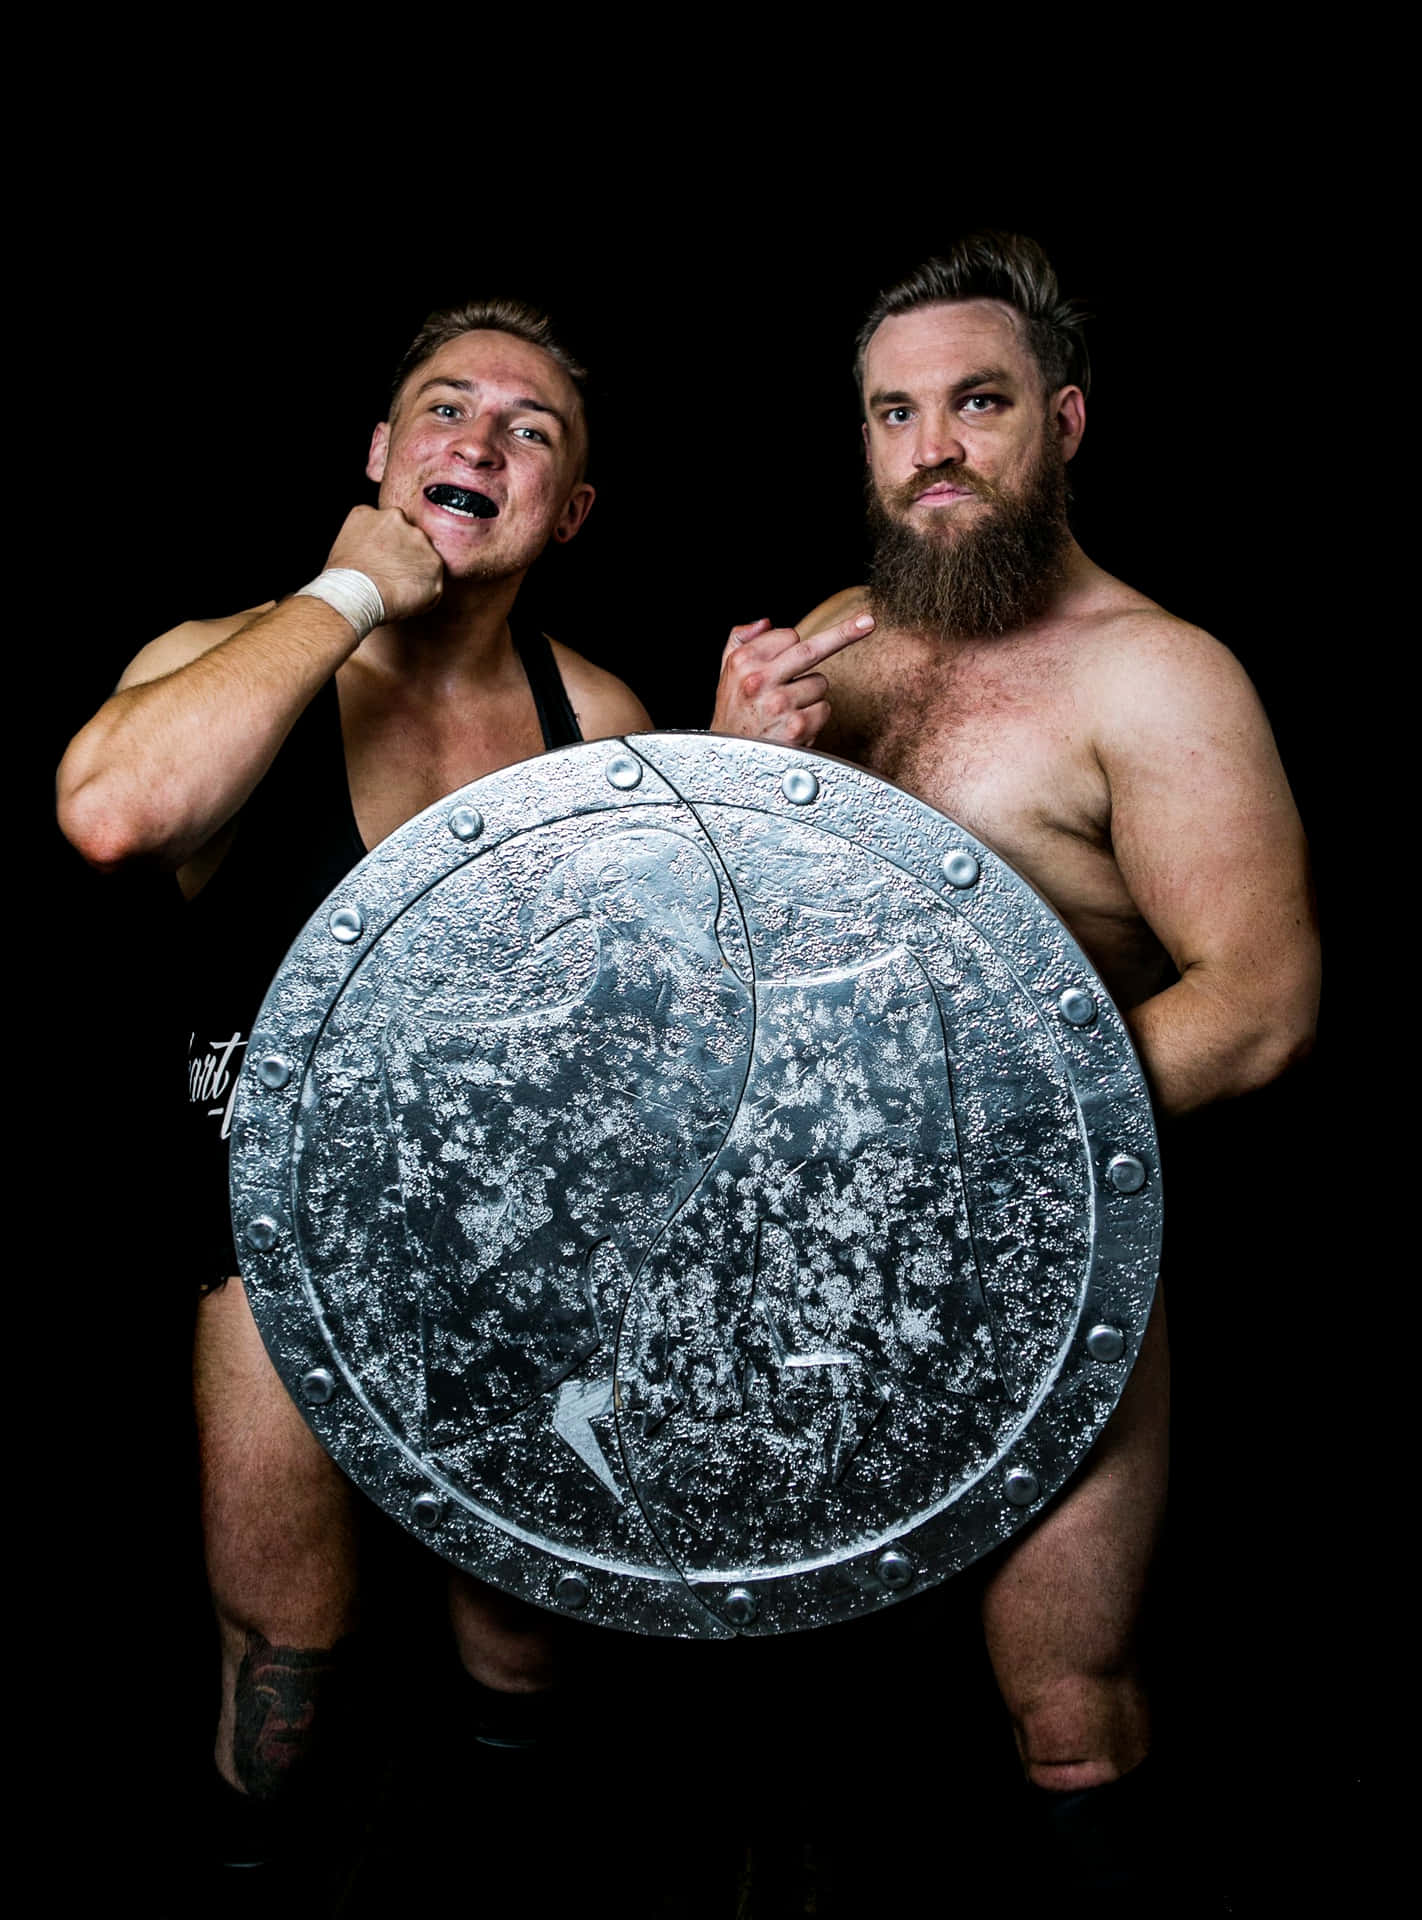 Tag Team Champion Pete Dunne